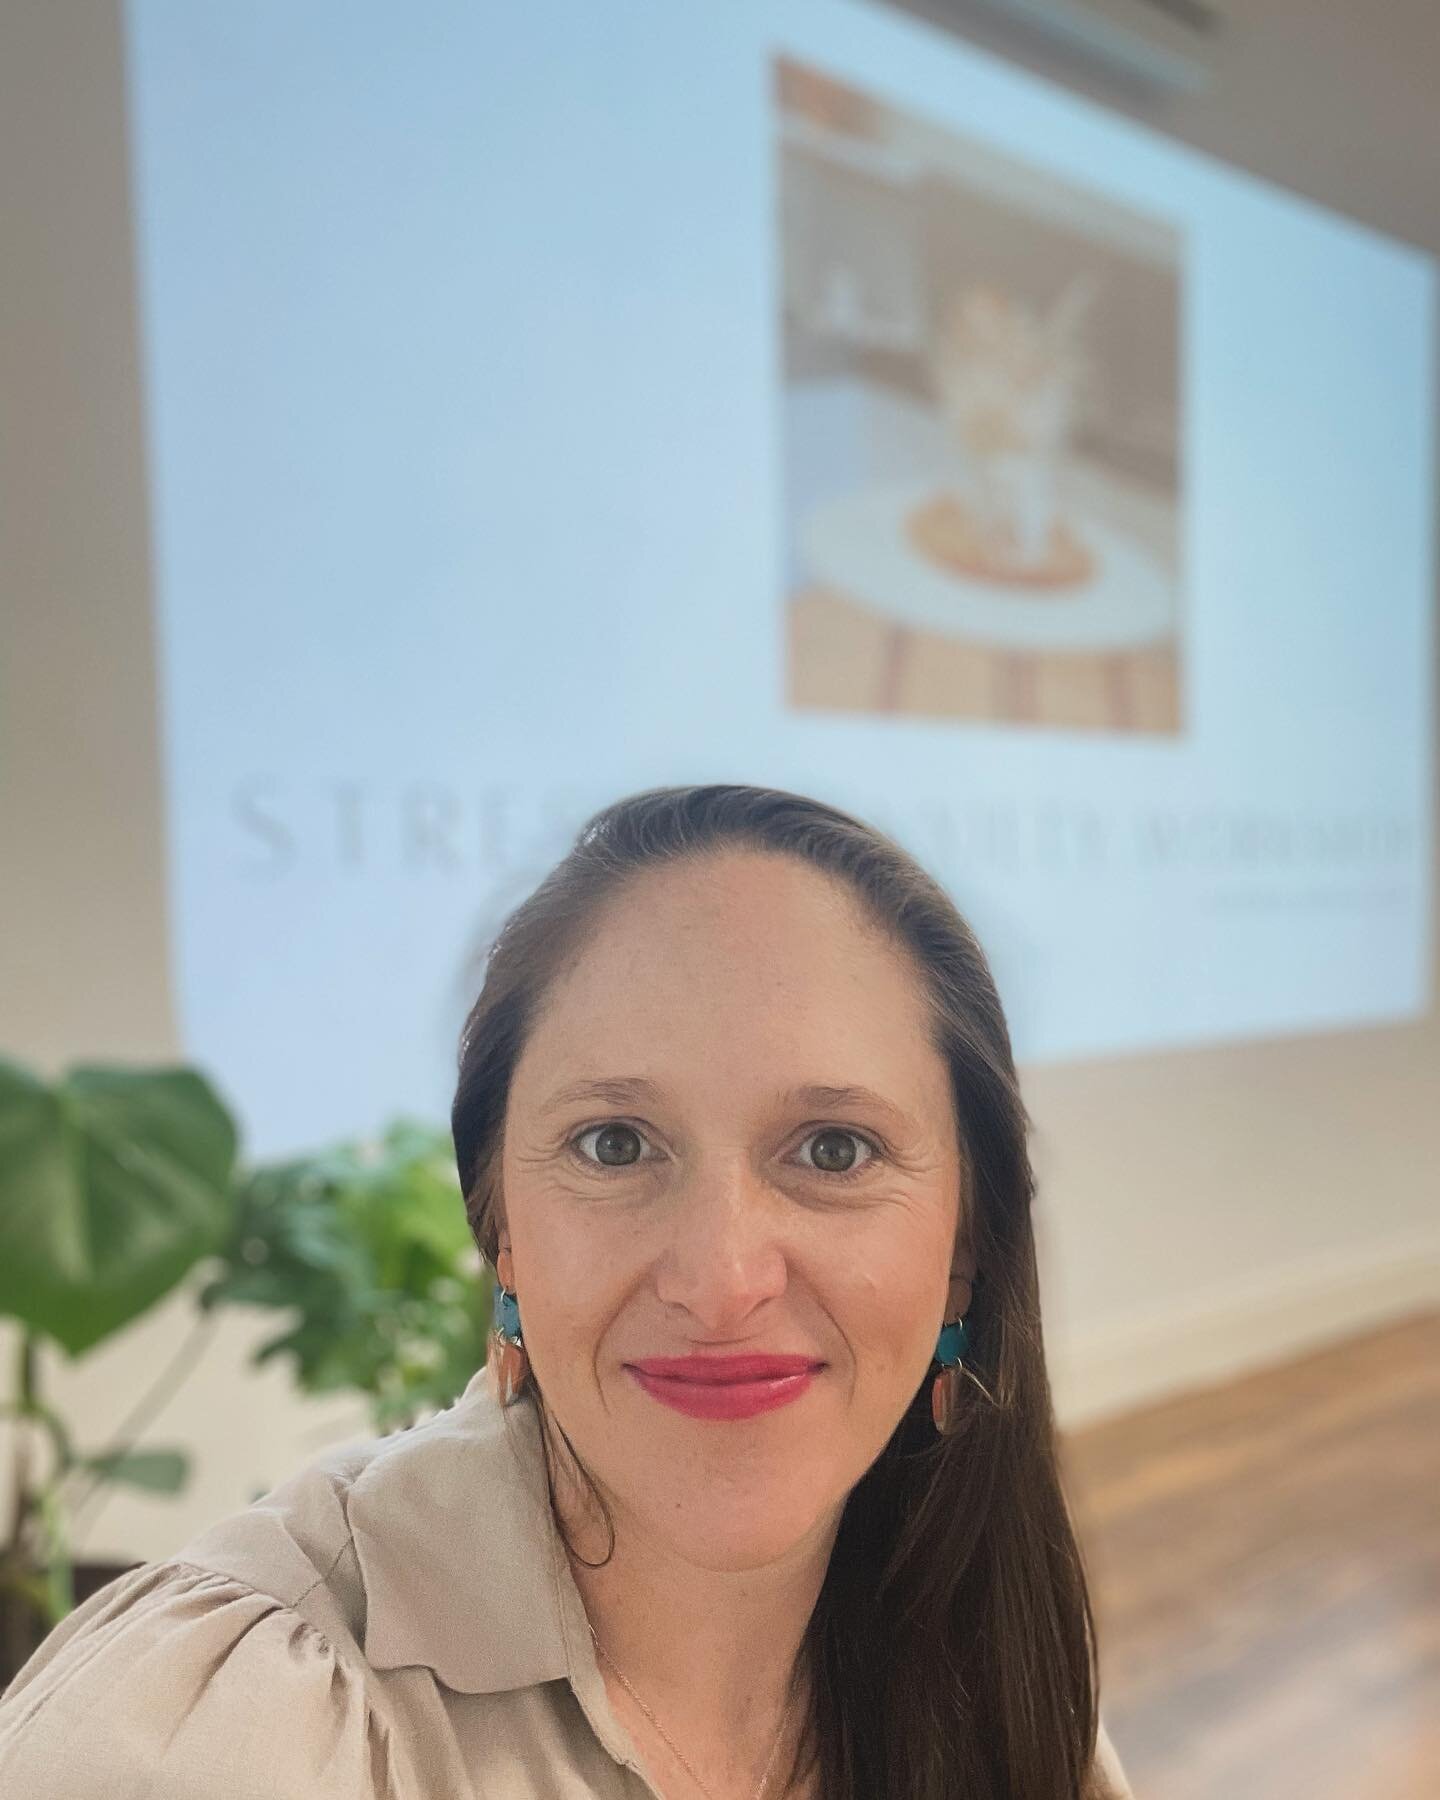 Content face after a beautiful morning with the wonderful attendees at my Stress &amp; Anxiety workshop this morning! 
In true fashion I had planned on a walk through and lots of photos of the stunning setup&hellip;. But I got caught up in the prep a